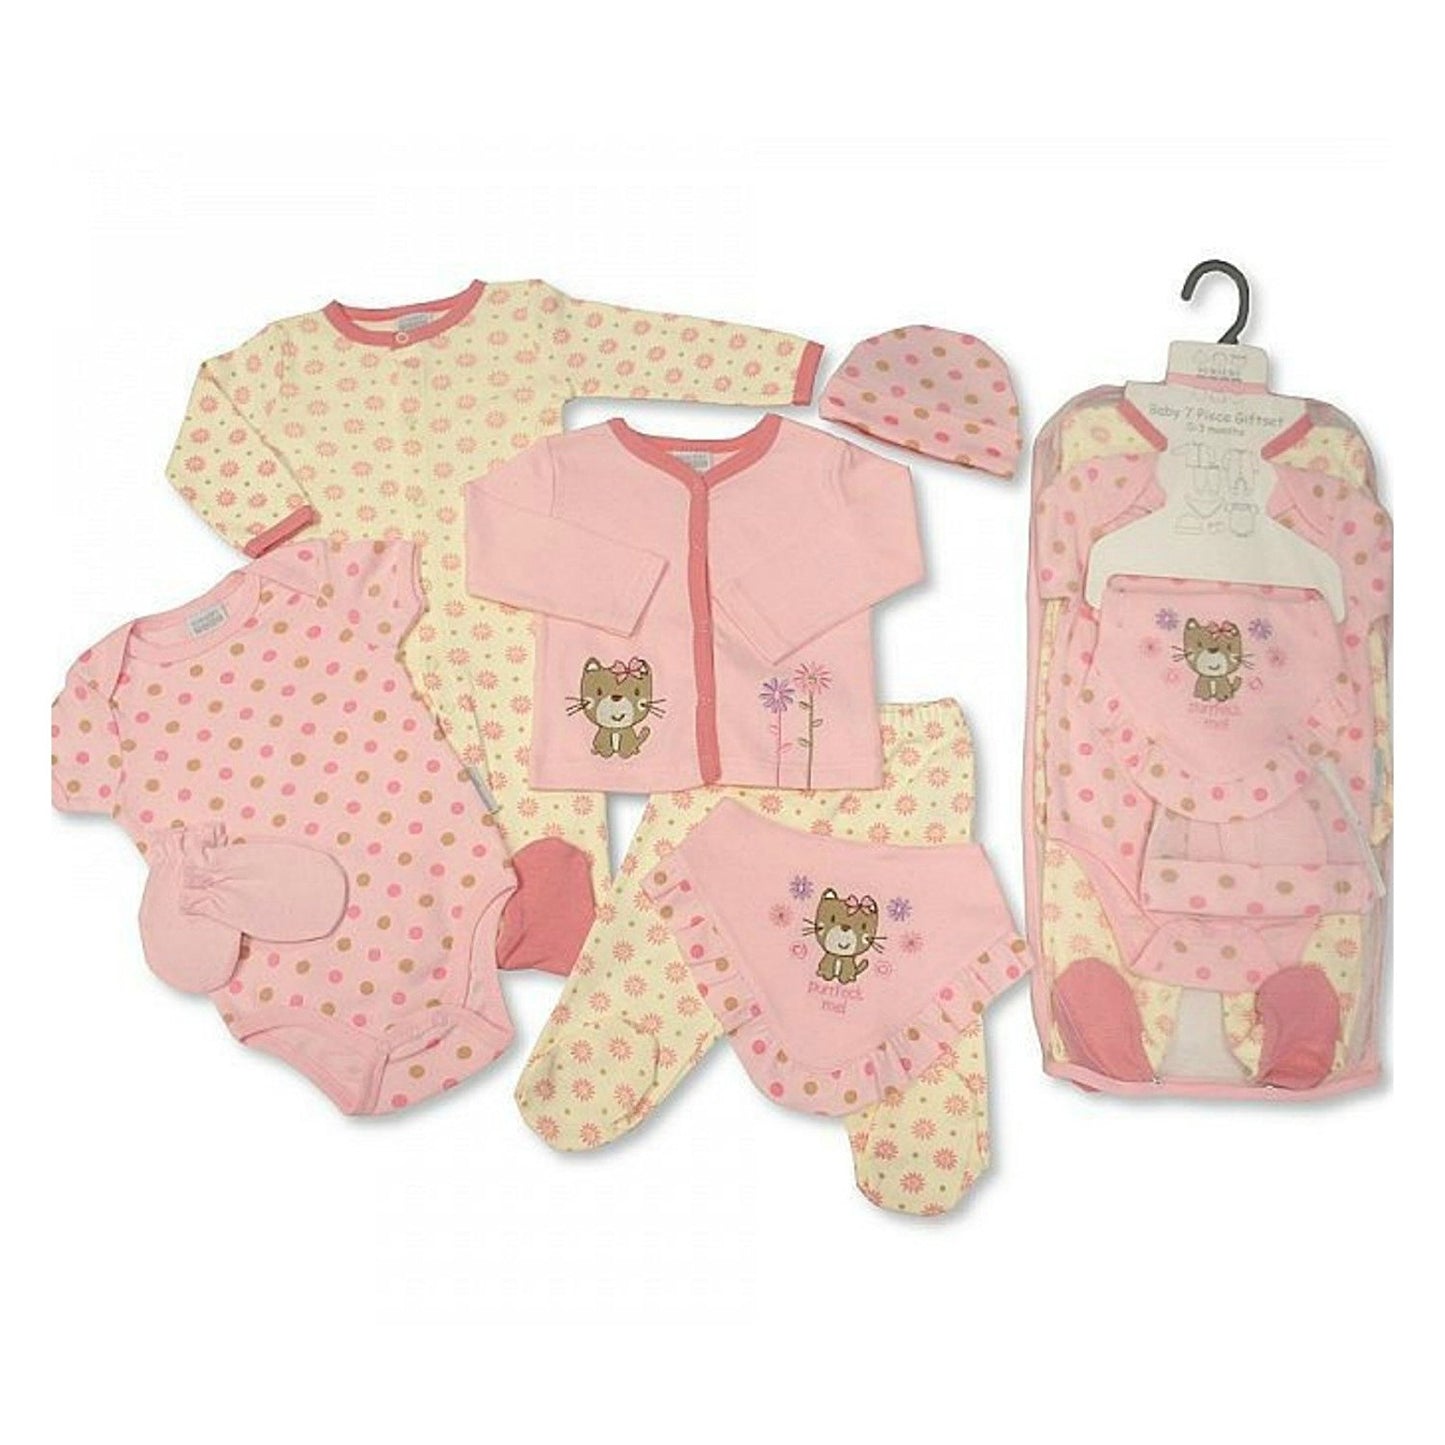 Baby Gift Set for Boy or Girl - 7 Piece Layette in a Mesh Bag - Nursery Time - hanrattycraftsgifts.co.uk